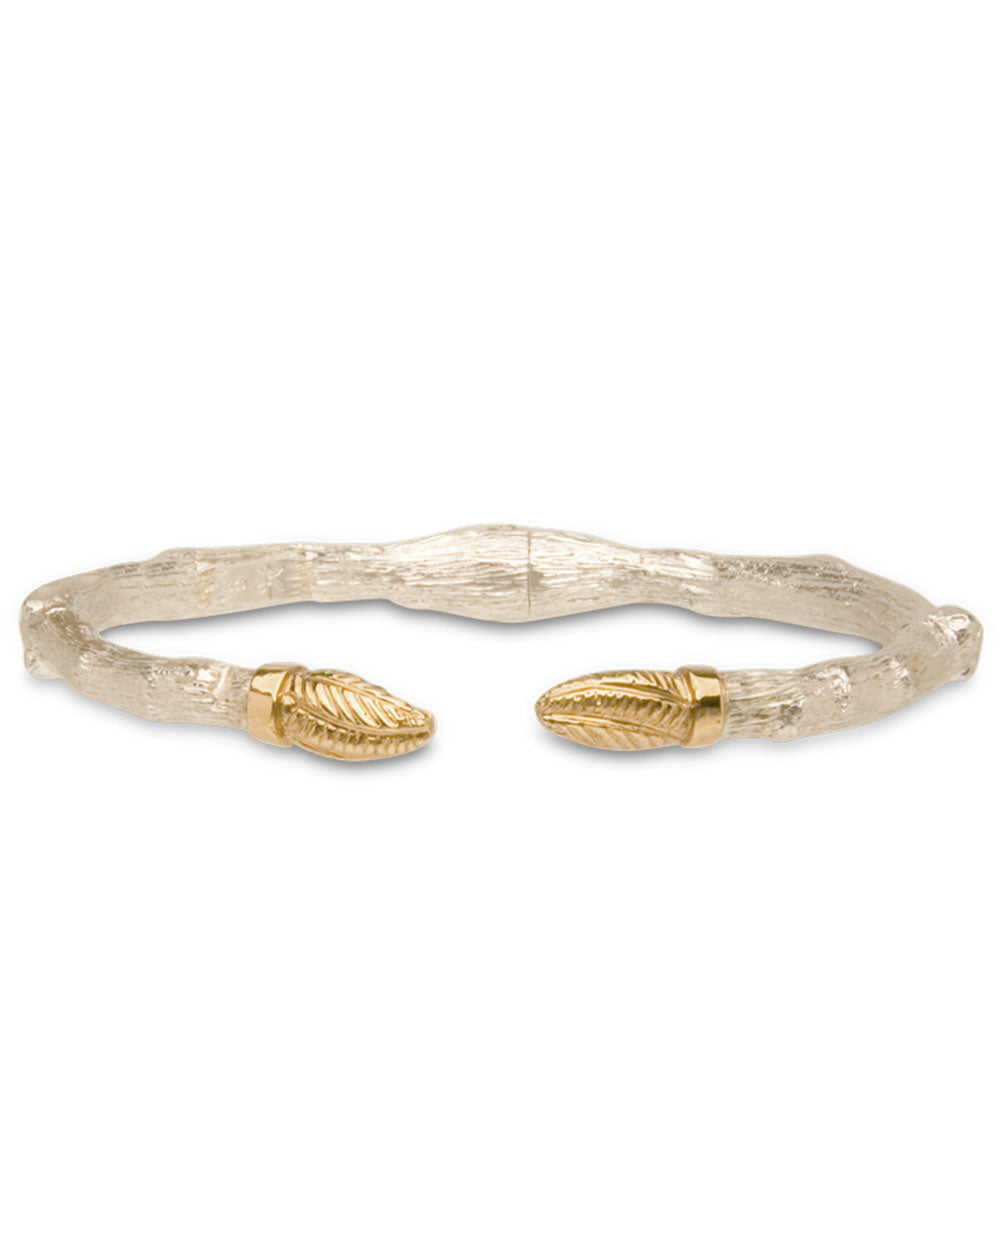 18k Yellow Gold and Sterling Silver Bud Twig Bracelet